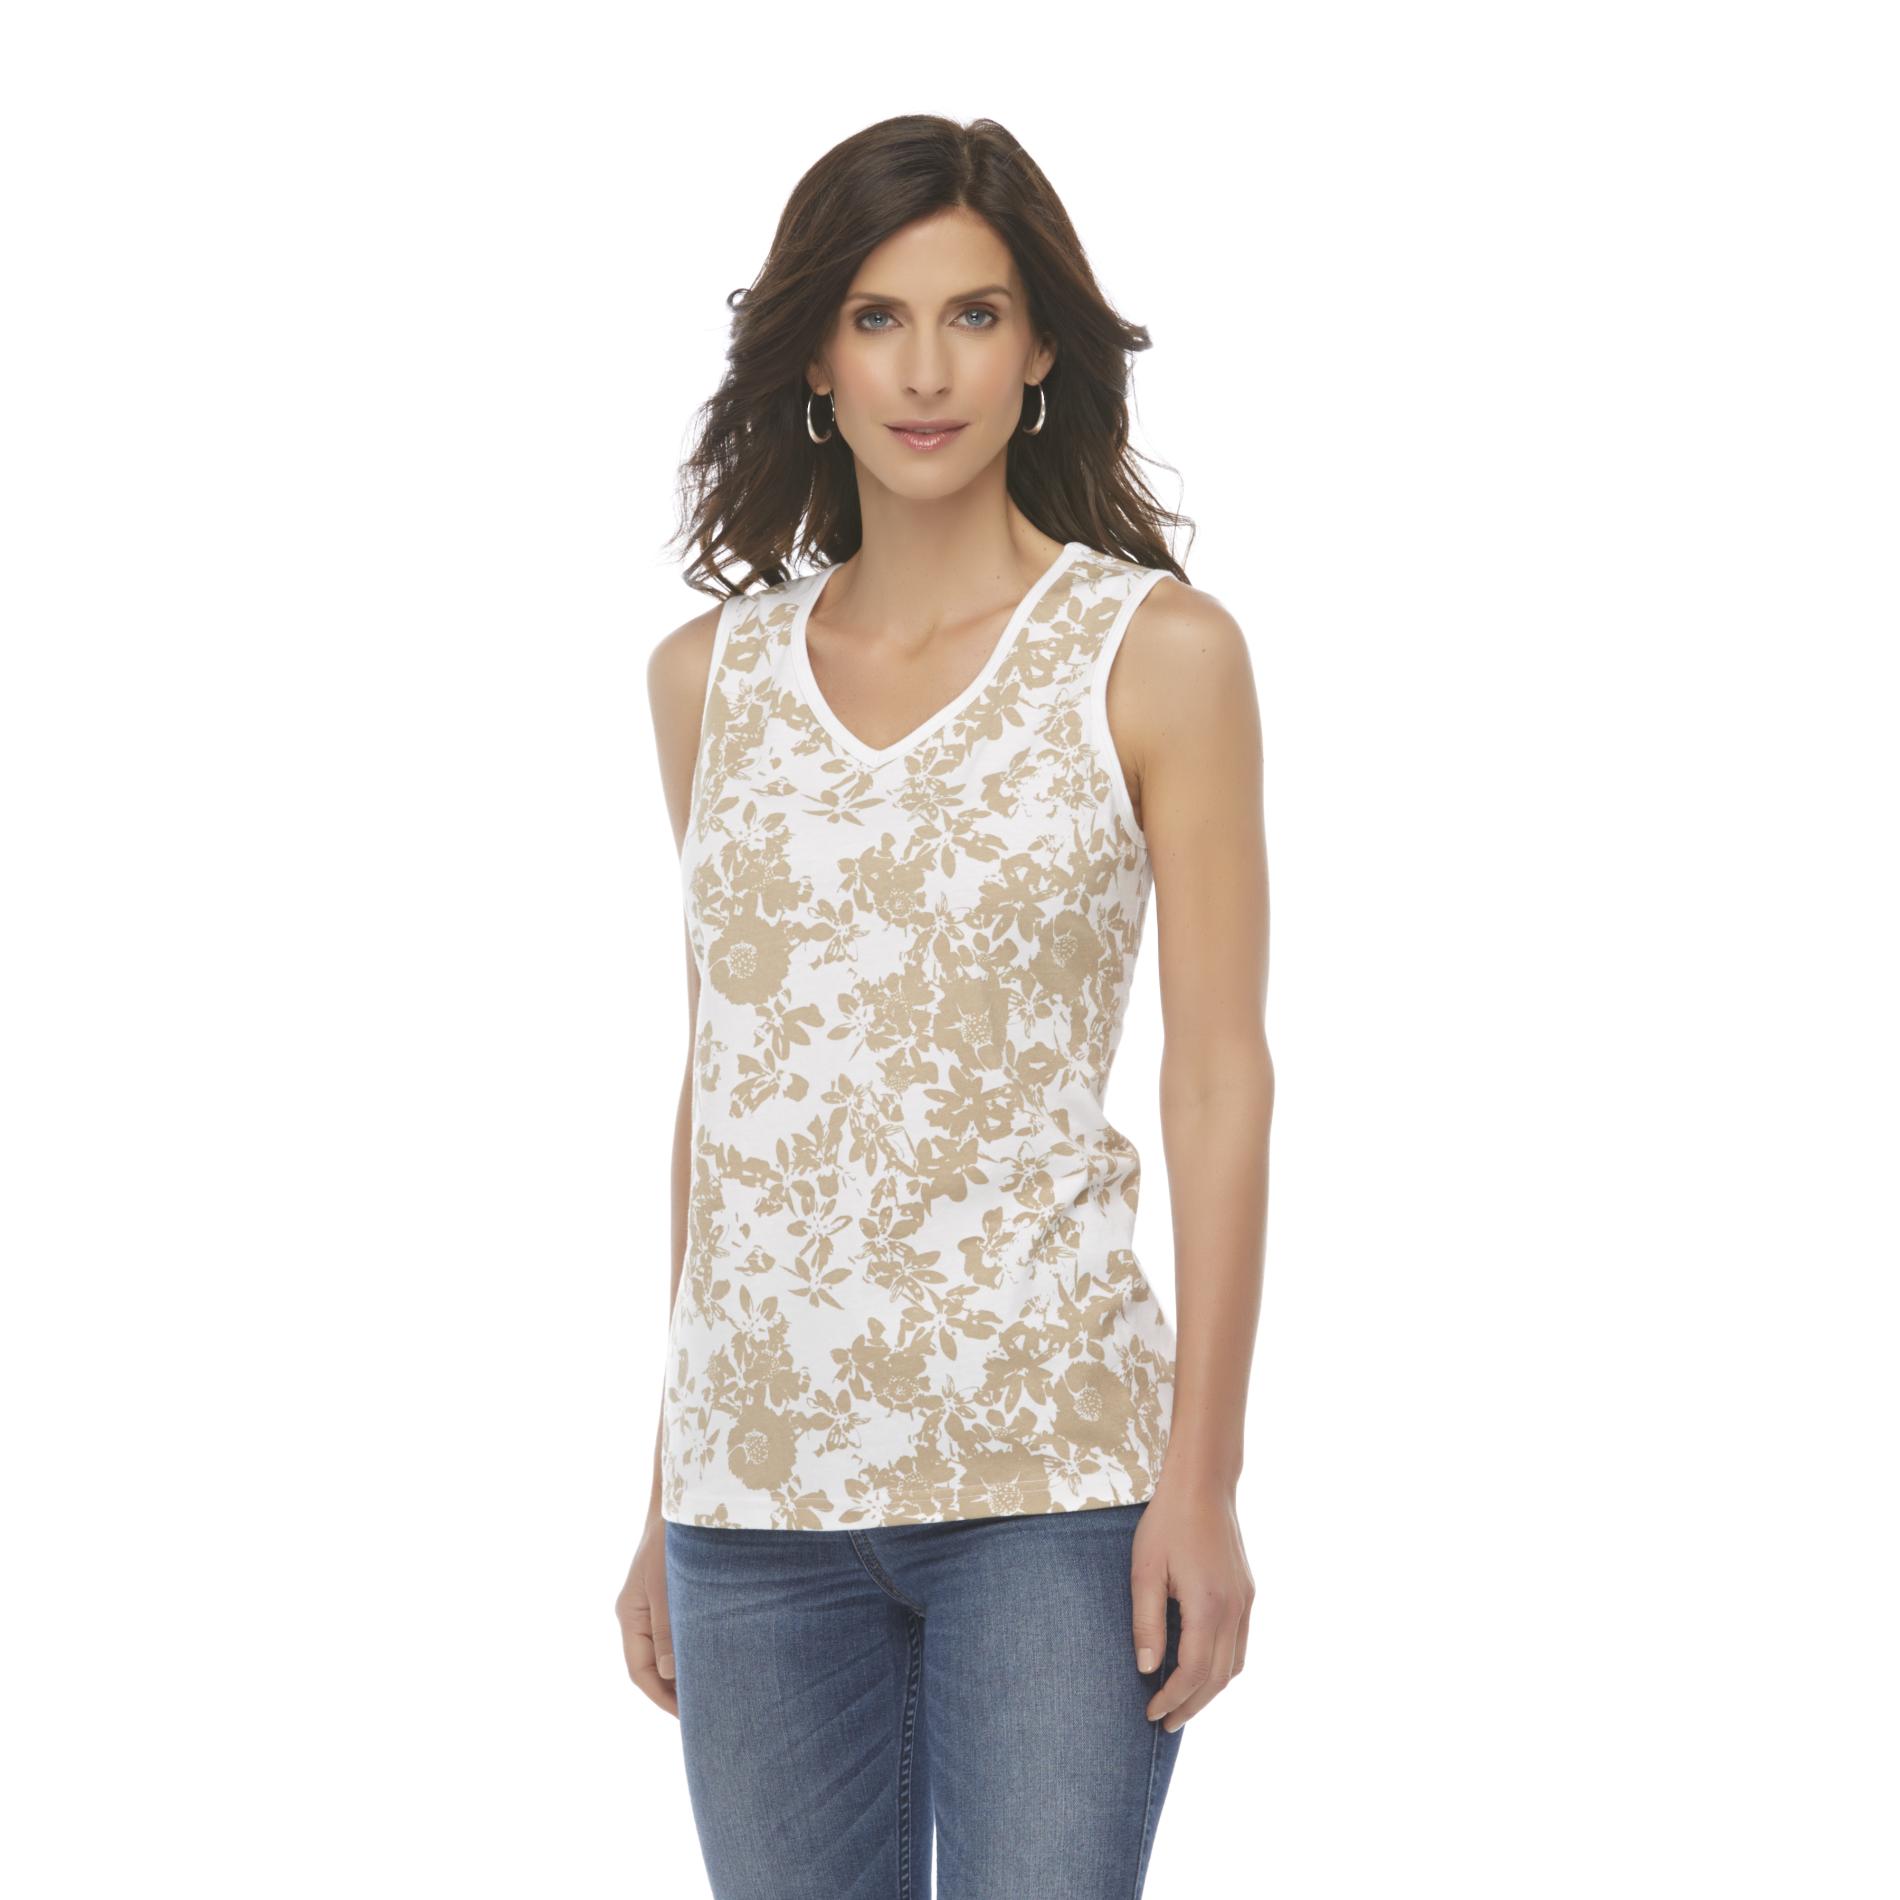 Basic Editions Women's Tank Top - Floral